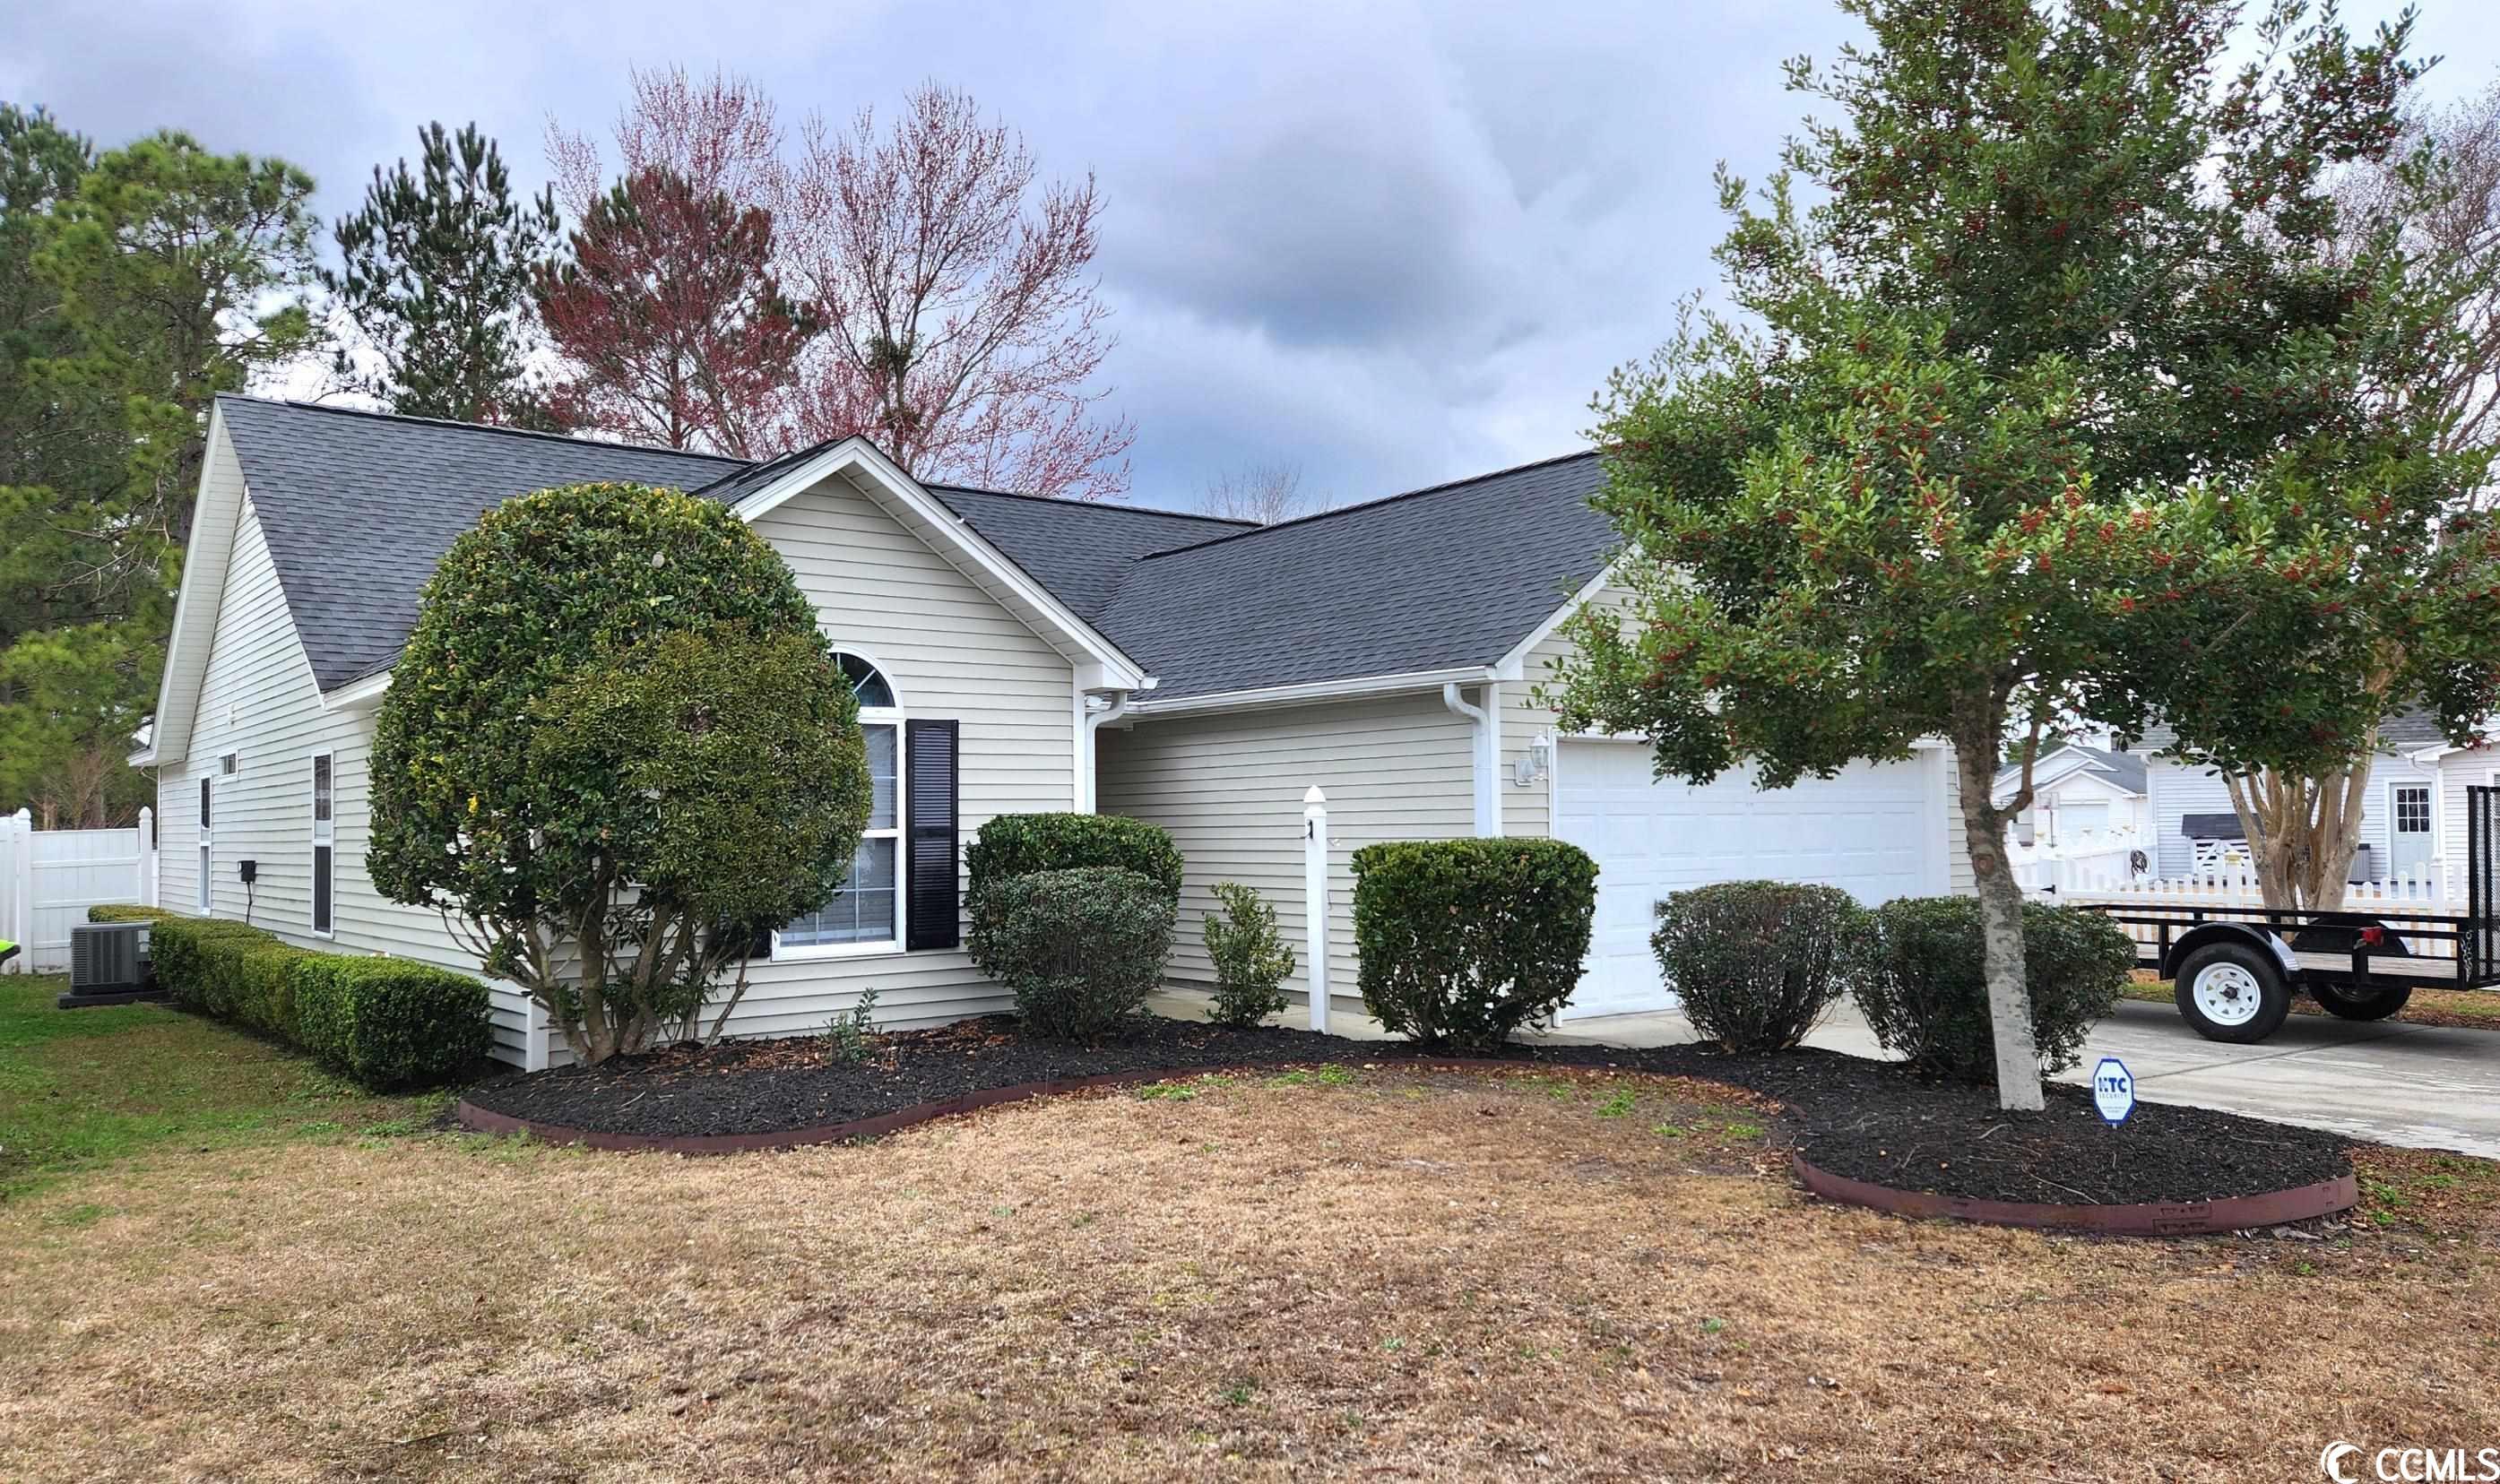 Photo one of 4689 Southgate Pkwy. Myrtle Beach SC 29579 | MLS 2402634